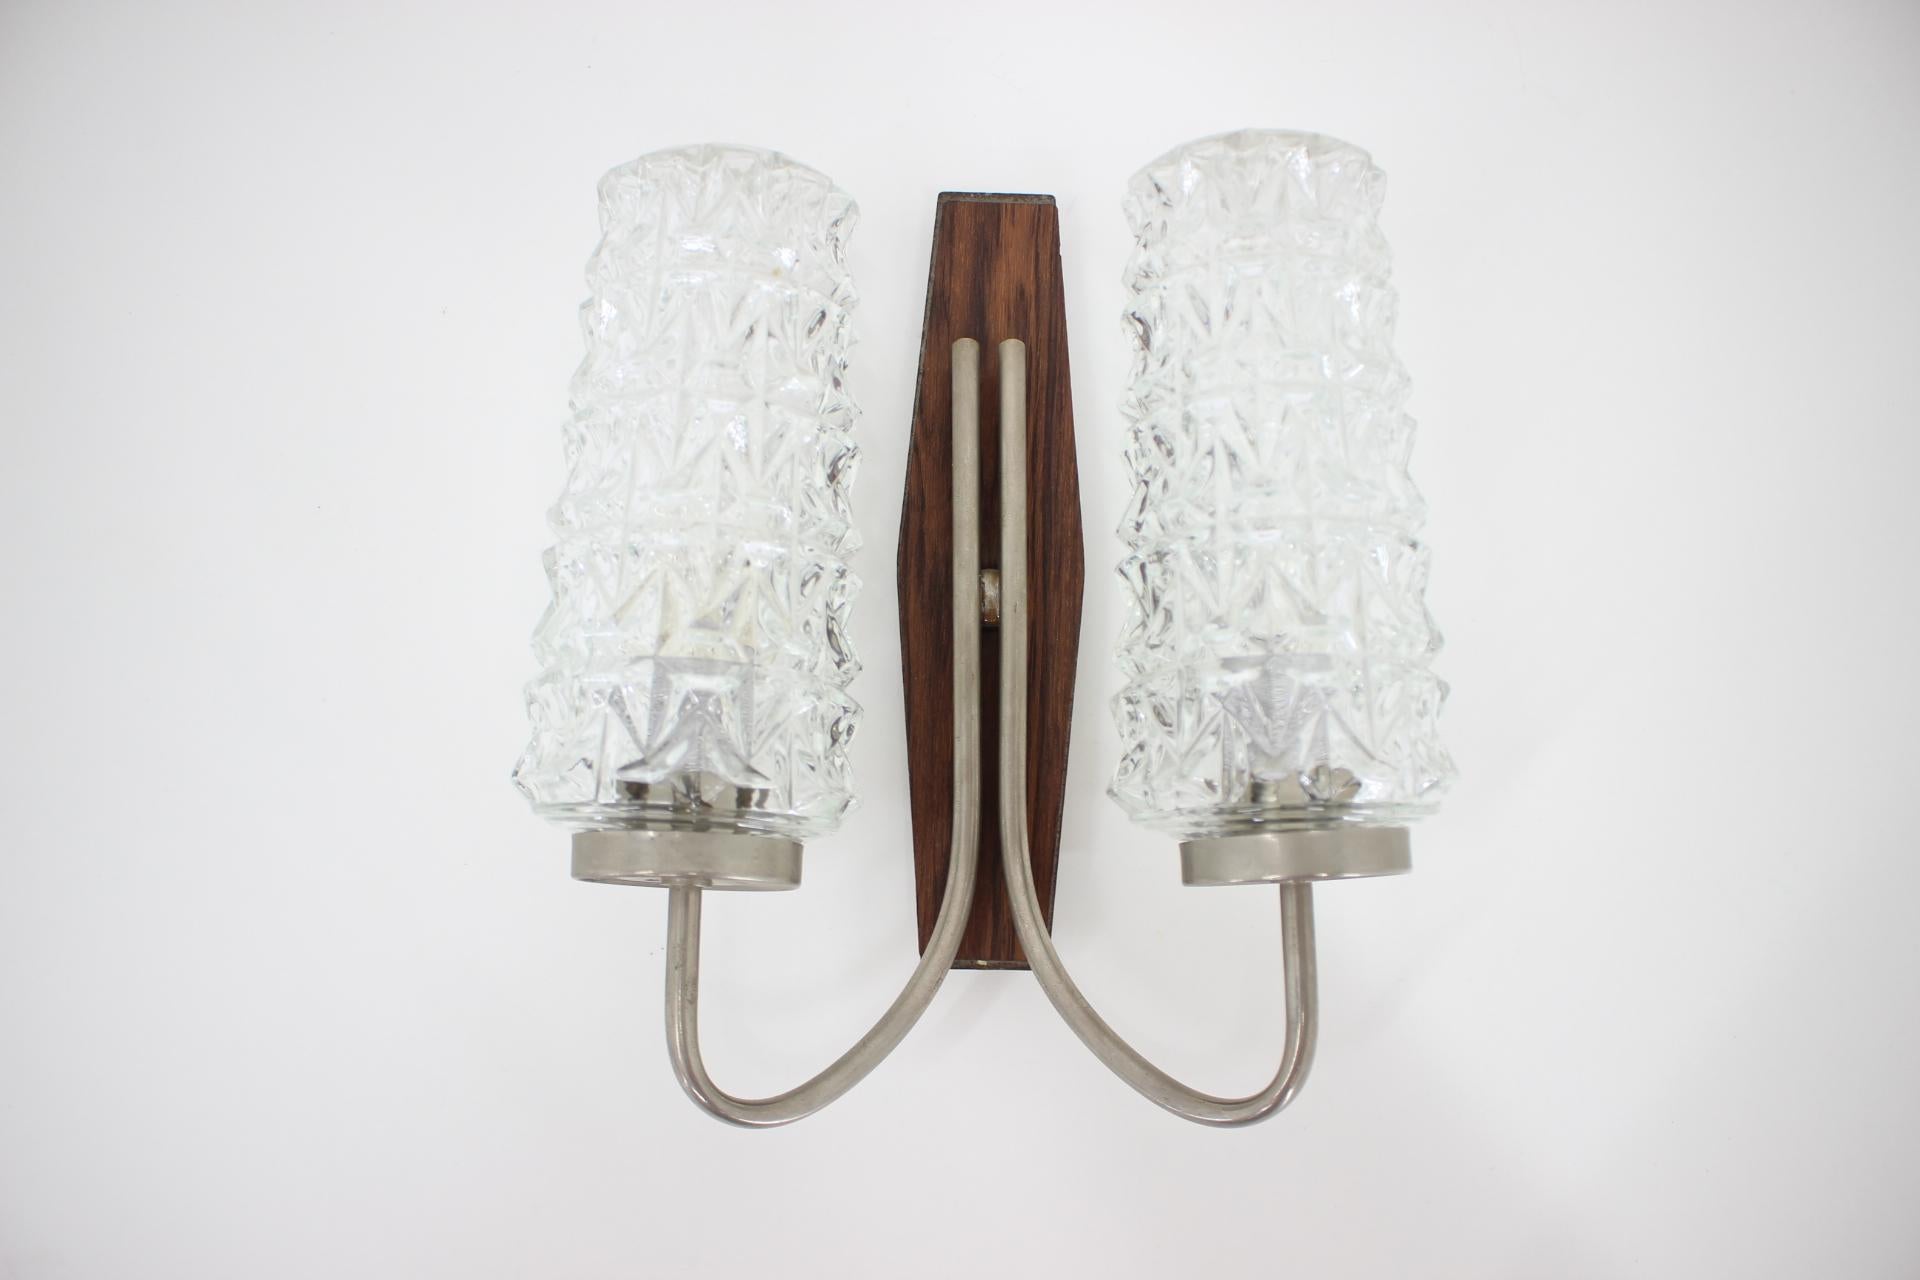 Metal Midcentury Wall Lamp in Style of Stilnovo, 1970s For Sale